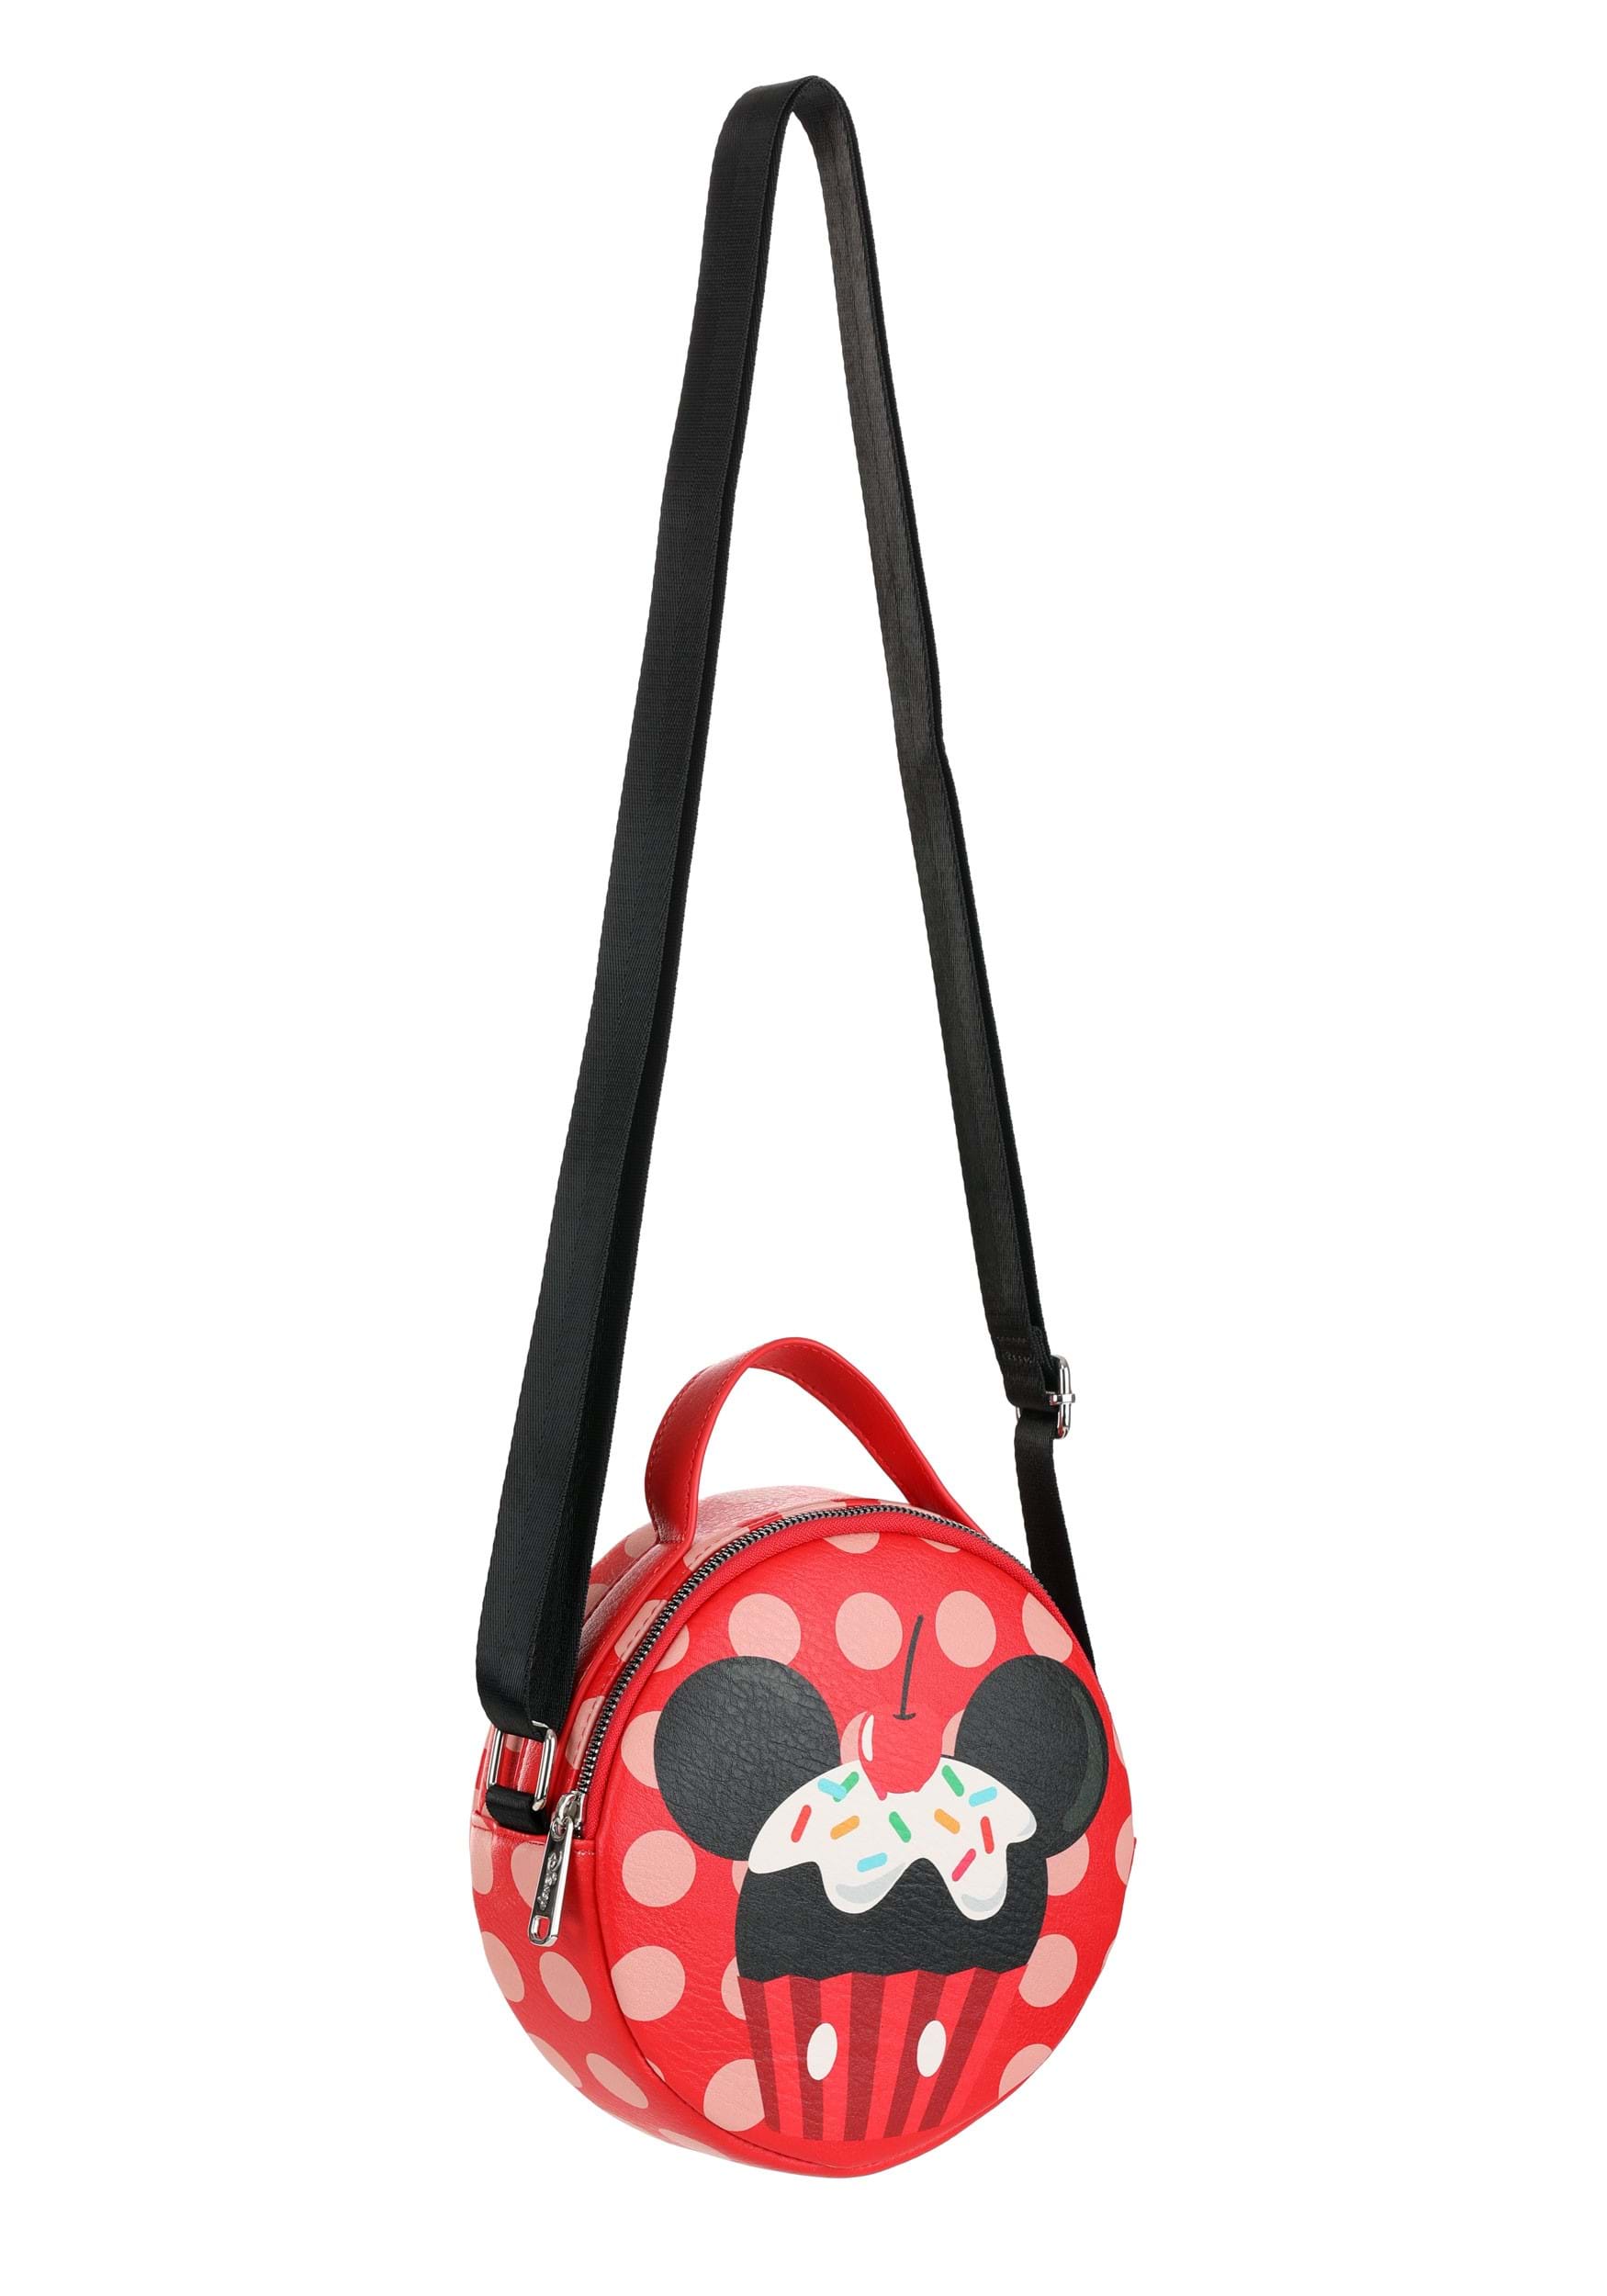 Vintage Avon Disney Mickey Mouse Black Duffel Bag New with Tags on eBid  United States | 218537564